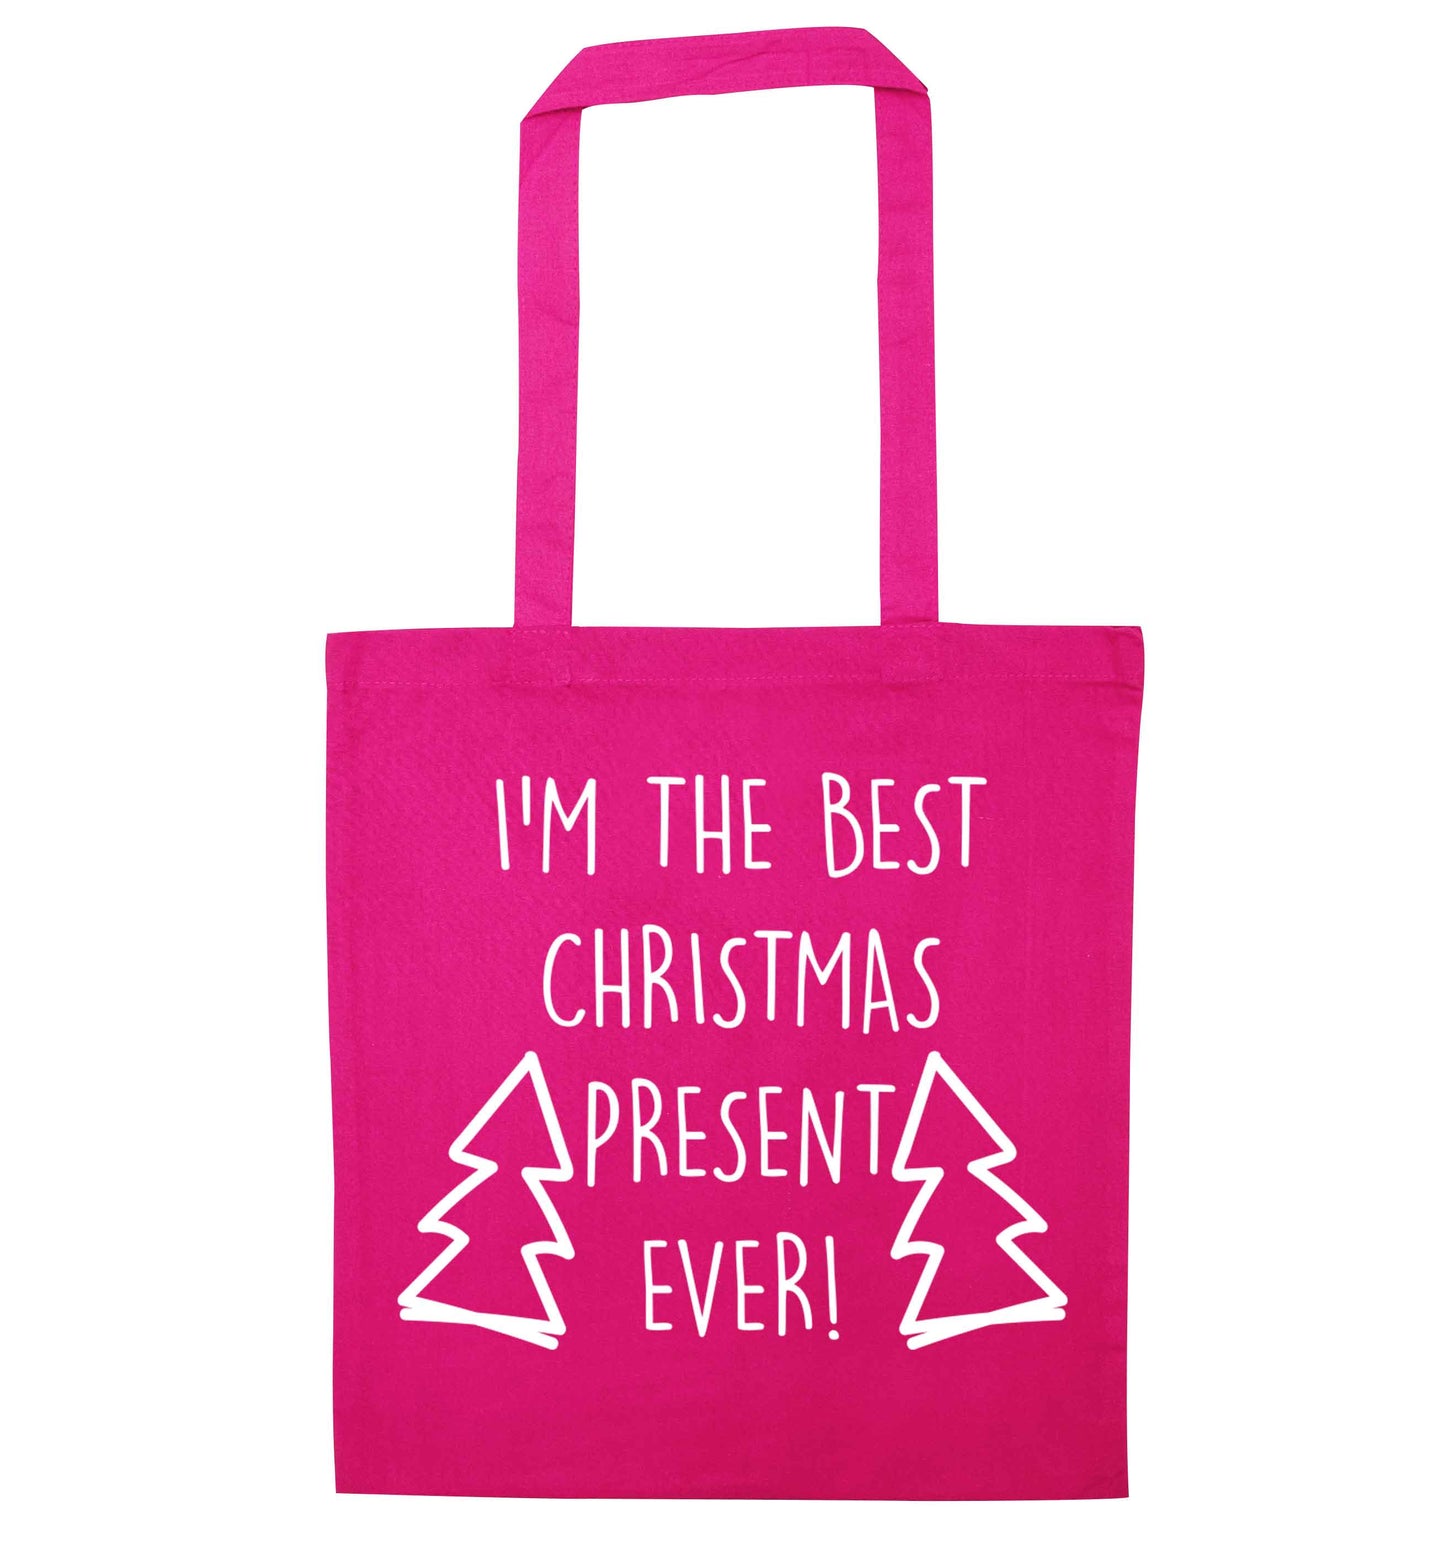 I'm the best Christmas present ever pink tote bag